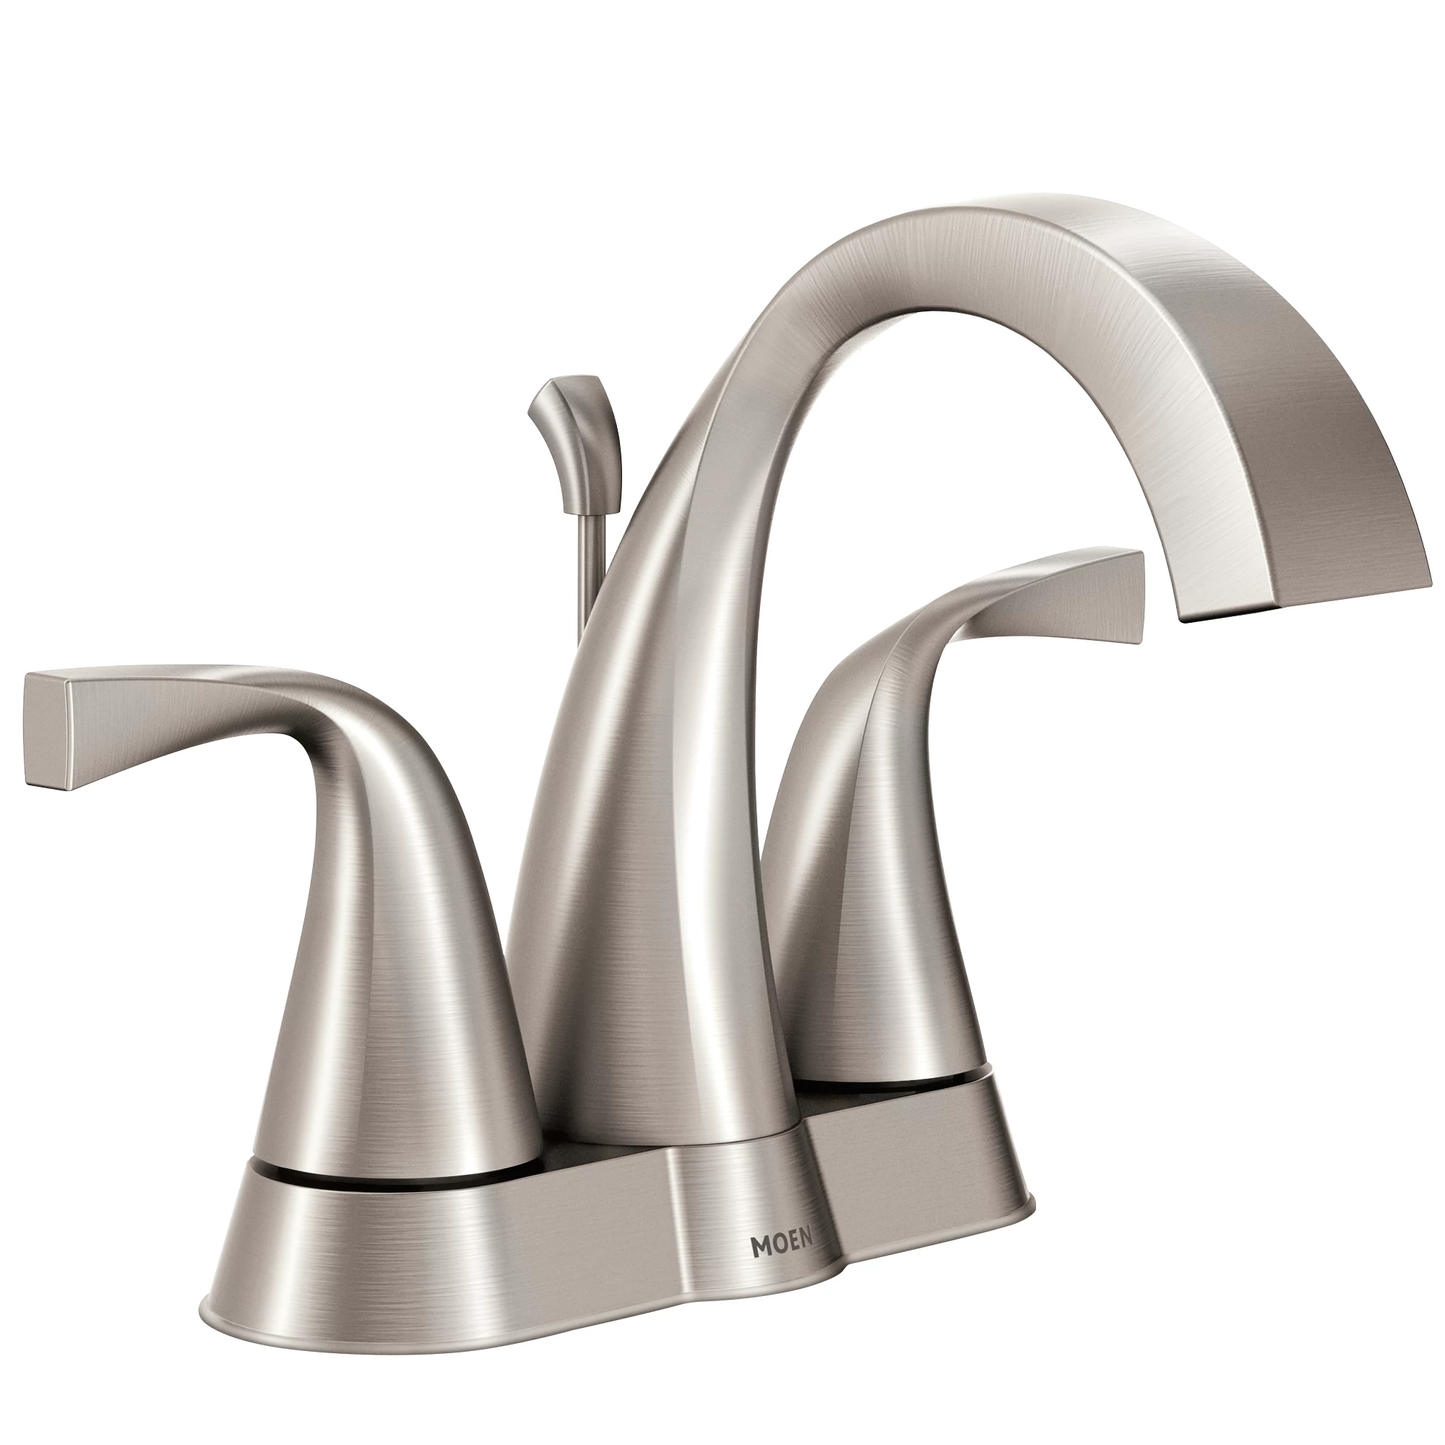 Oxby Two-handle Bathroom Faucet